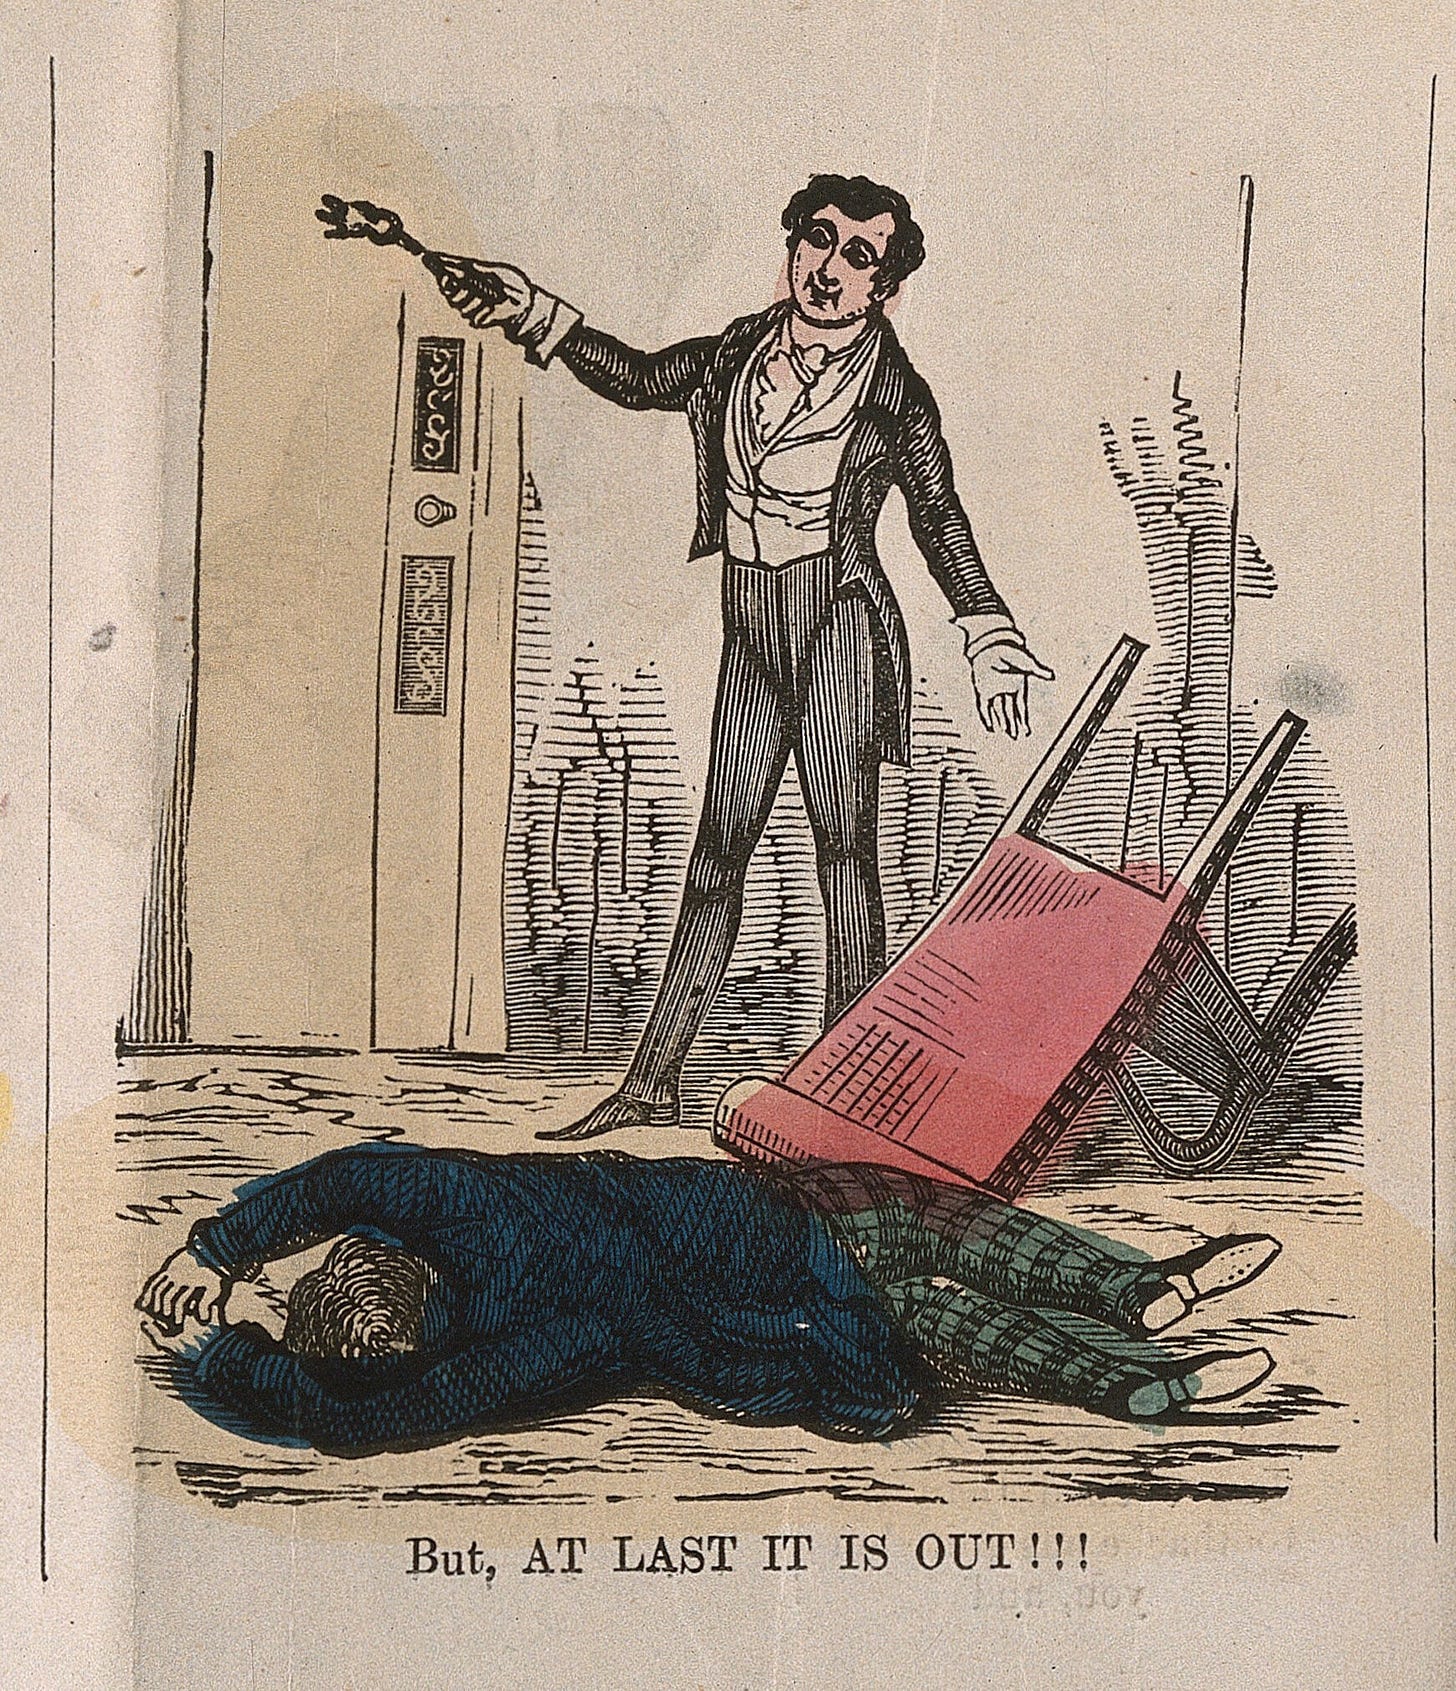 A mid-19th century illustration of a dentist truimphantly holding up a tooth in a pair of forceps. Near him is an overturned chair and his patient is lying on the floor facing away from the viewer.